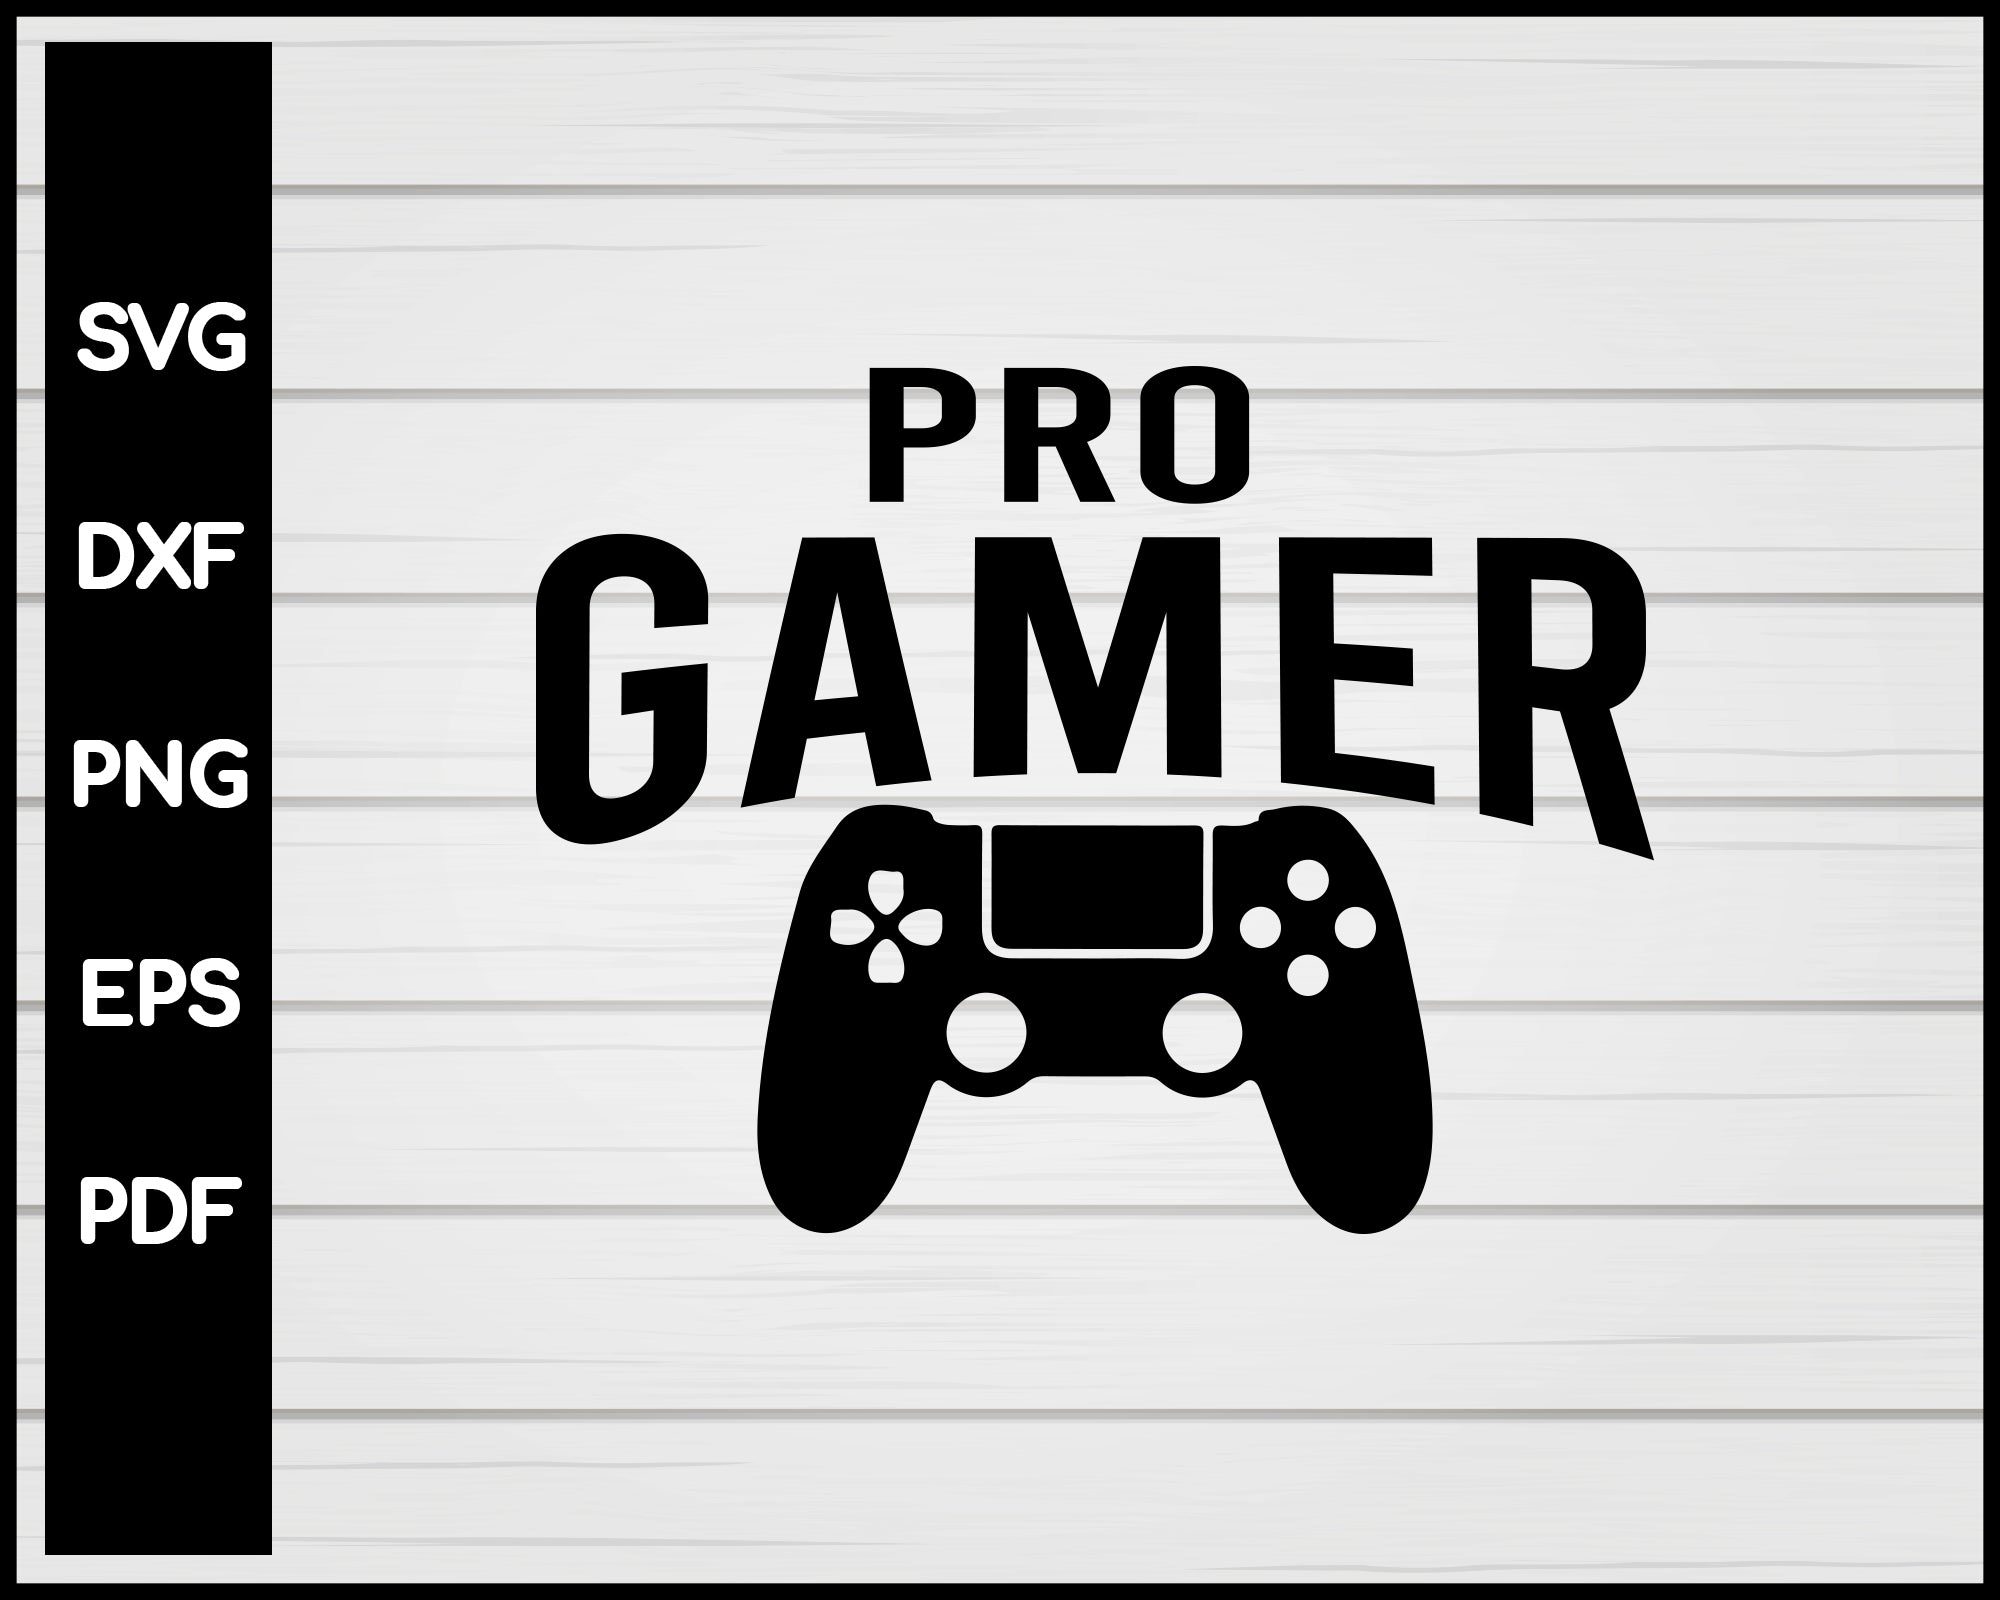 Pro Gamer Video Game svg Designs For Cricut Silhouette And eps png Printable Files